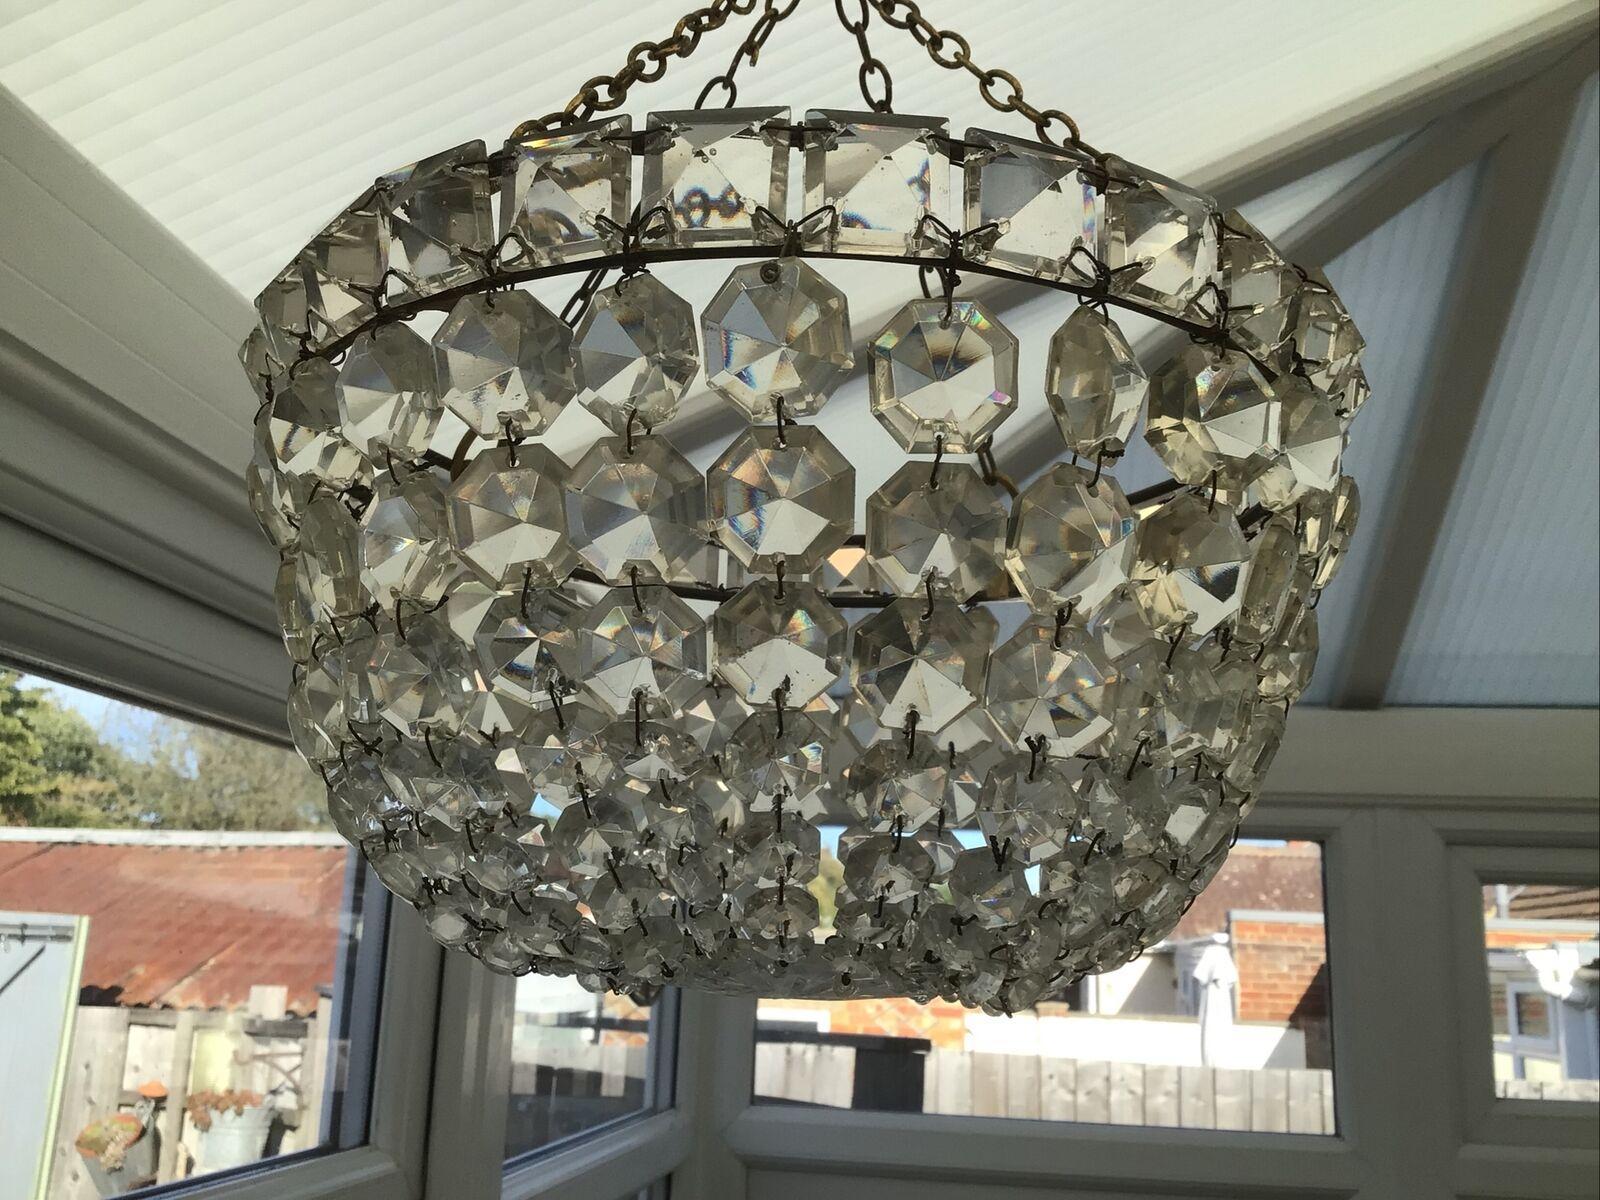 19thc British Regency style Chandelier/ Pendant Cut Crystal Ceiling Fixture. Bag of crystal style. Reminescent of Empire bag and tent form.